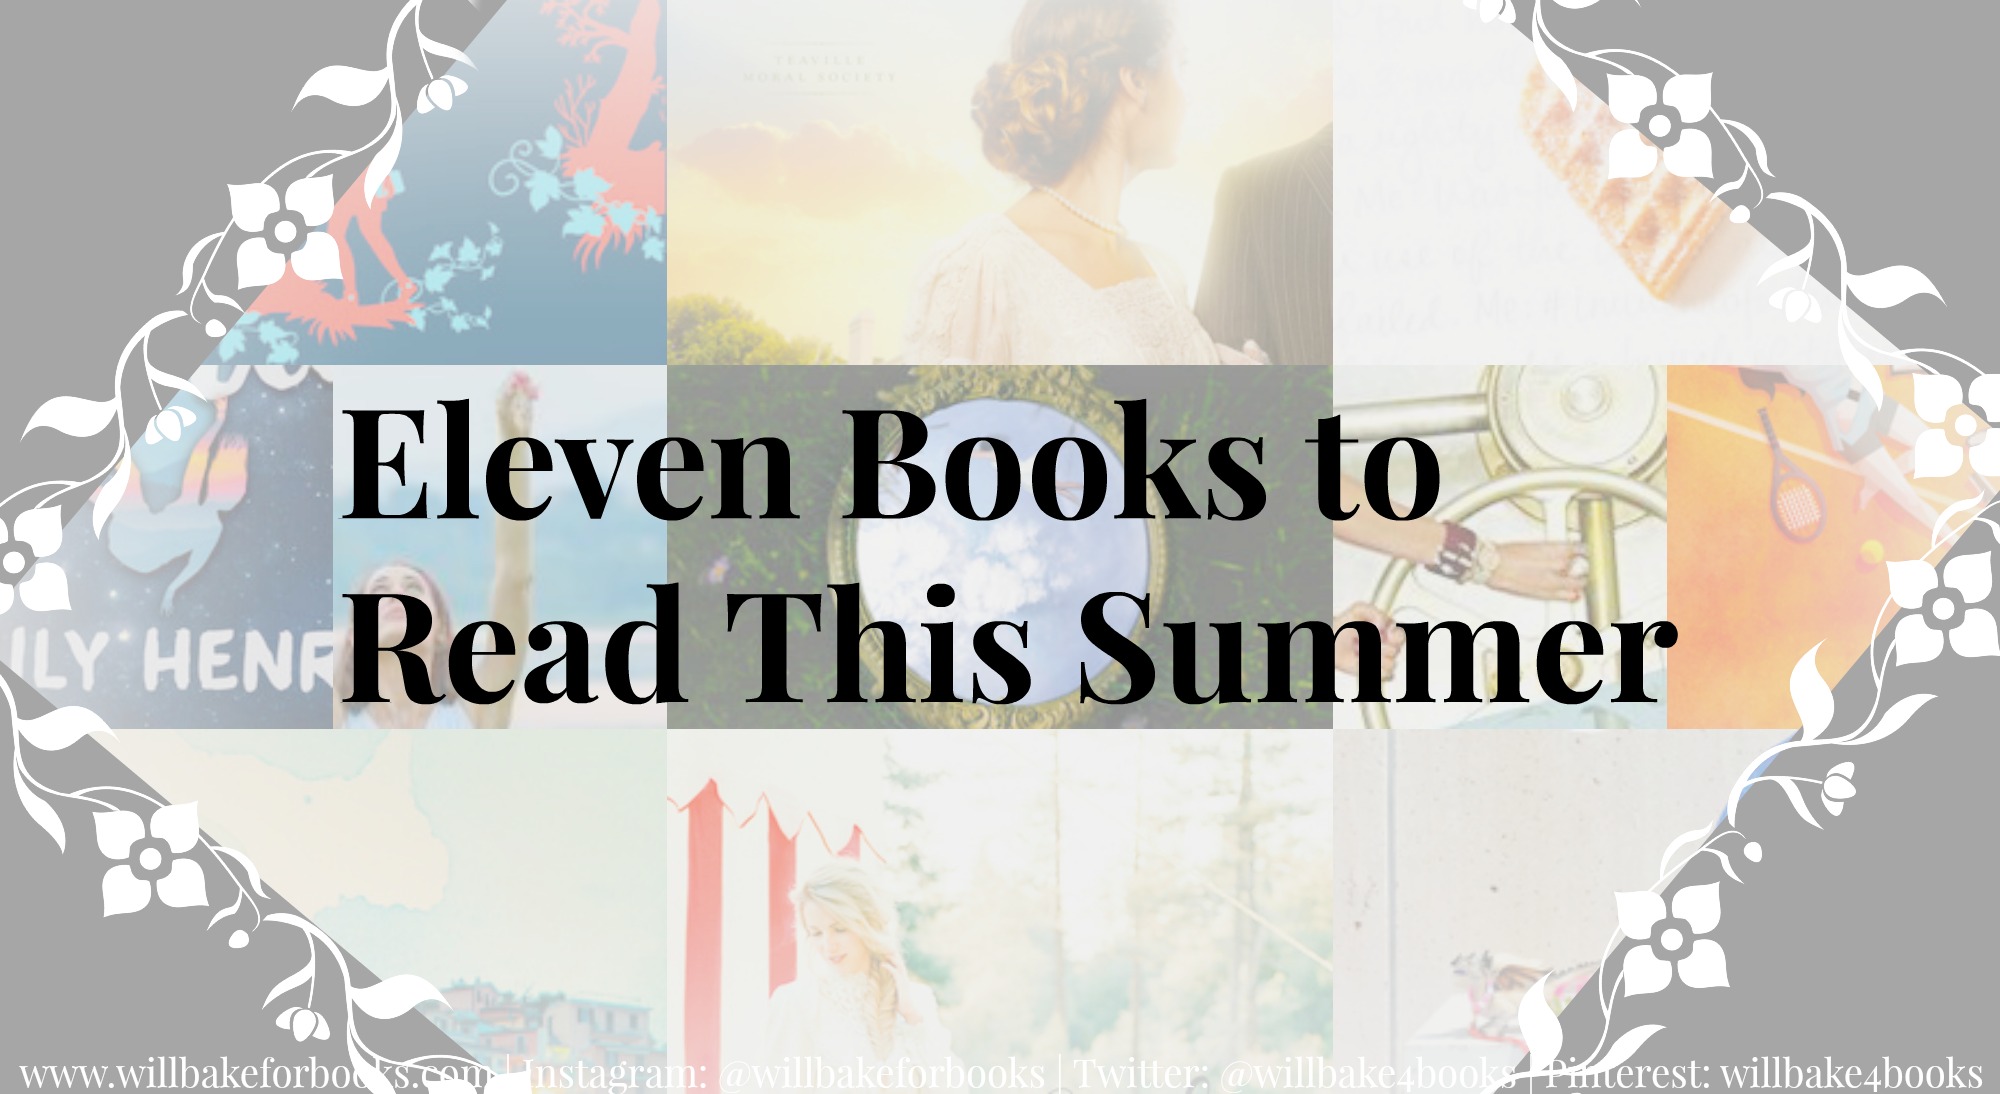 Eleven Books to Read This Summer